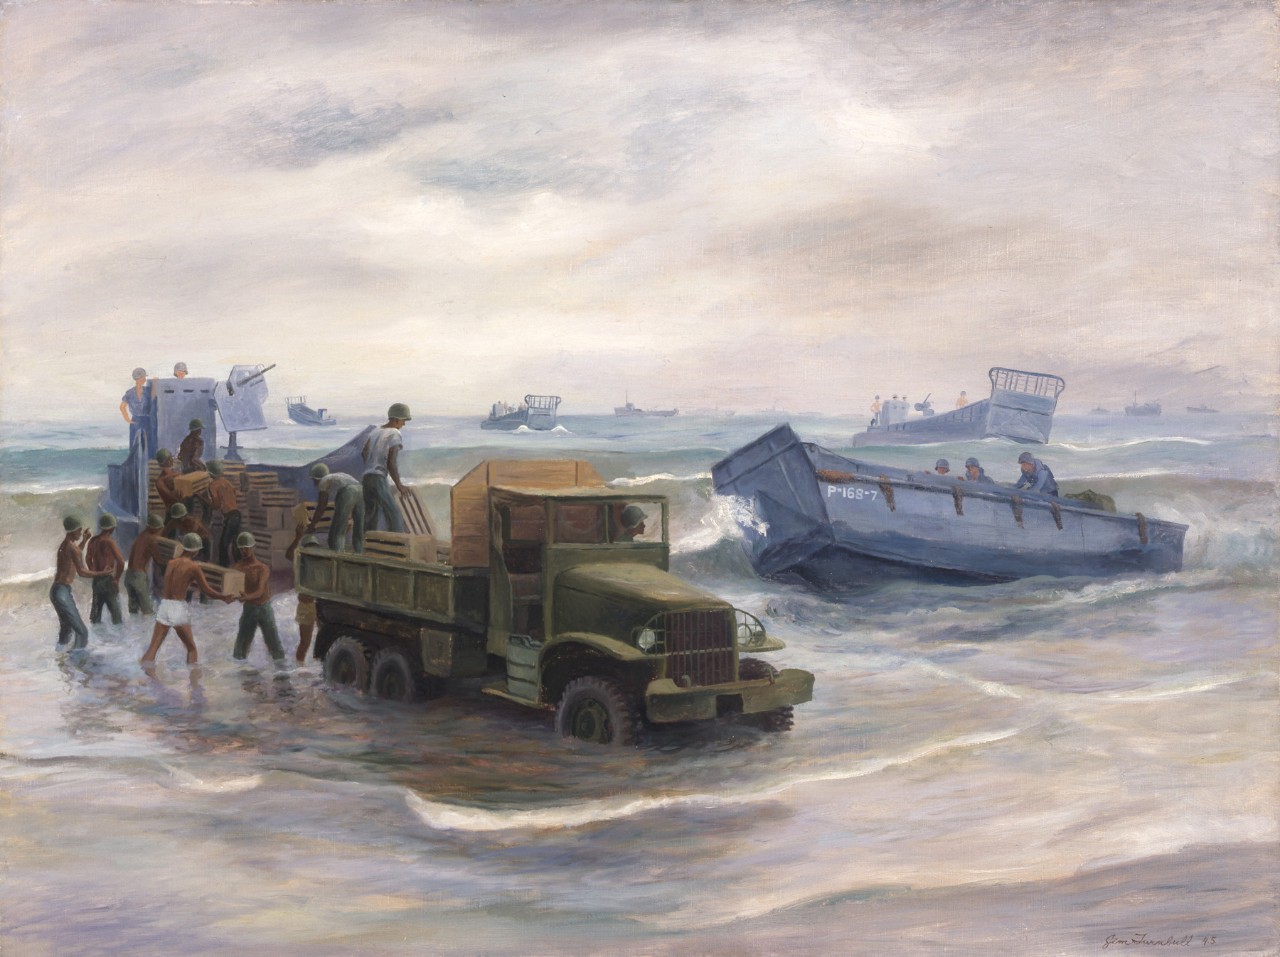 Supplies are unloaded from a landing craft